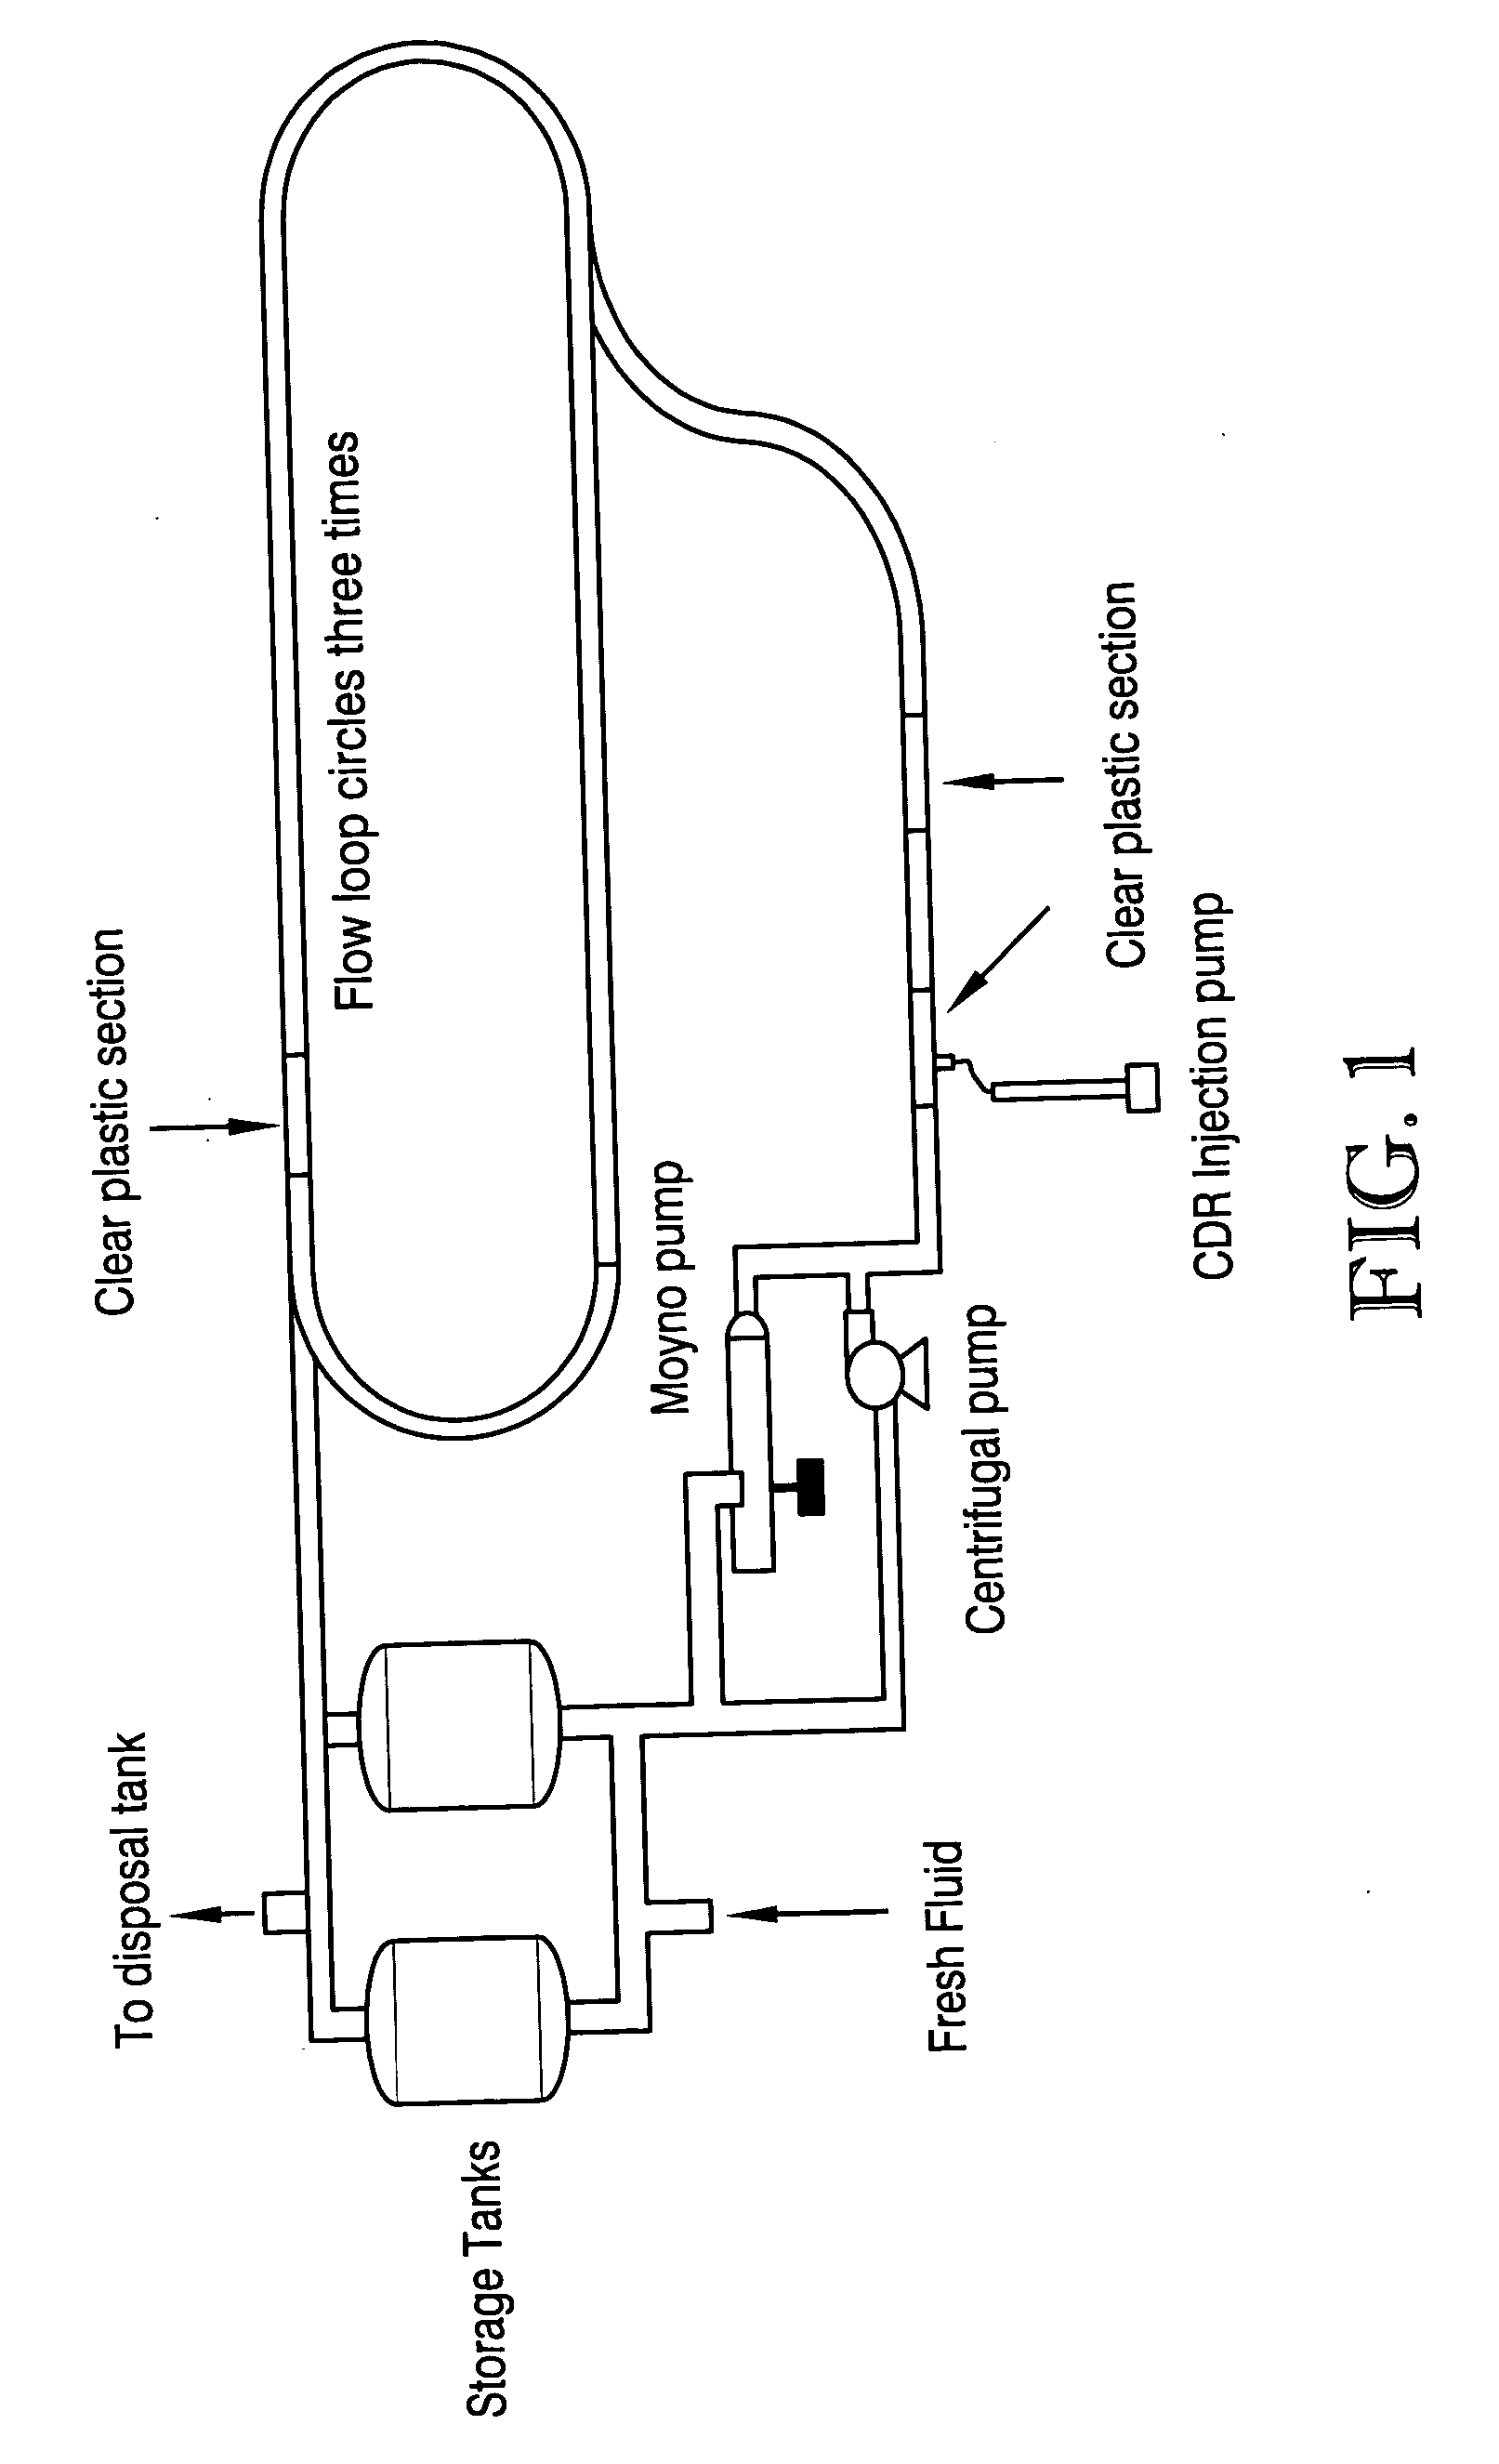 Modified latex drag reducer and processes therefor and therewith